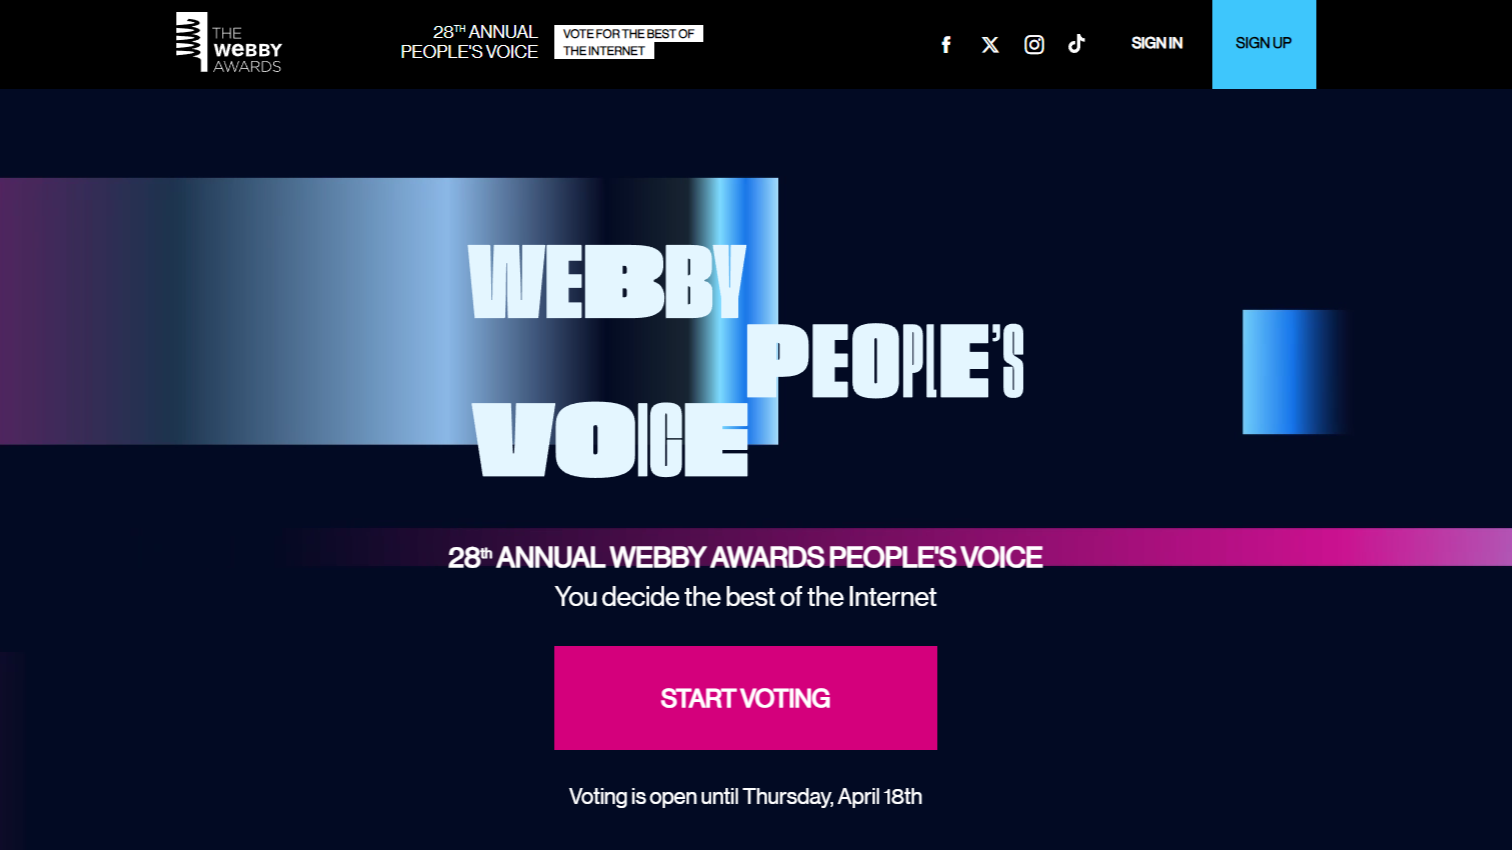 Of All This Year&#8217;s Webby Awards Honorees, Just One Is A Legal Tech Company &#8211; You Can Vote for It By April 18